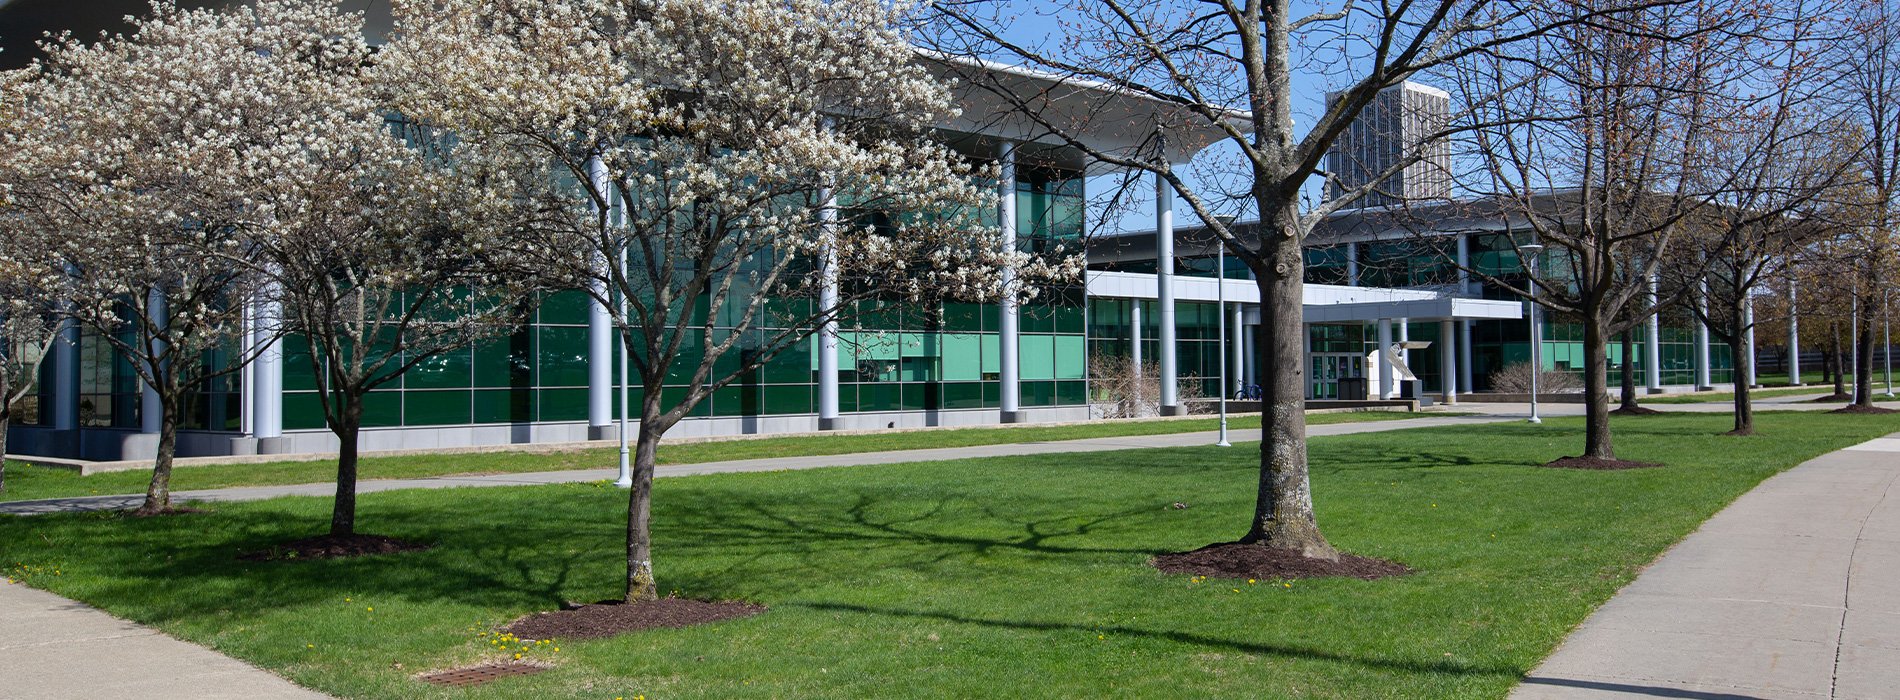 Exterior of the Life Sciences Research Building, covered in green-toned glass panels and surrounded by budding trees and green grass.